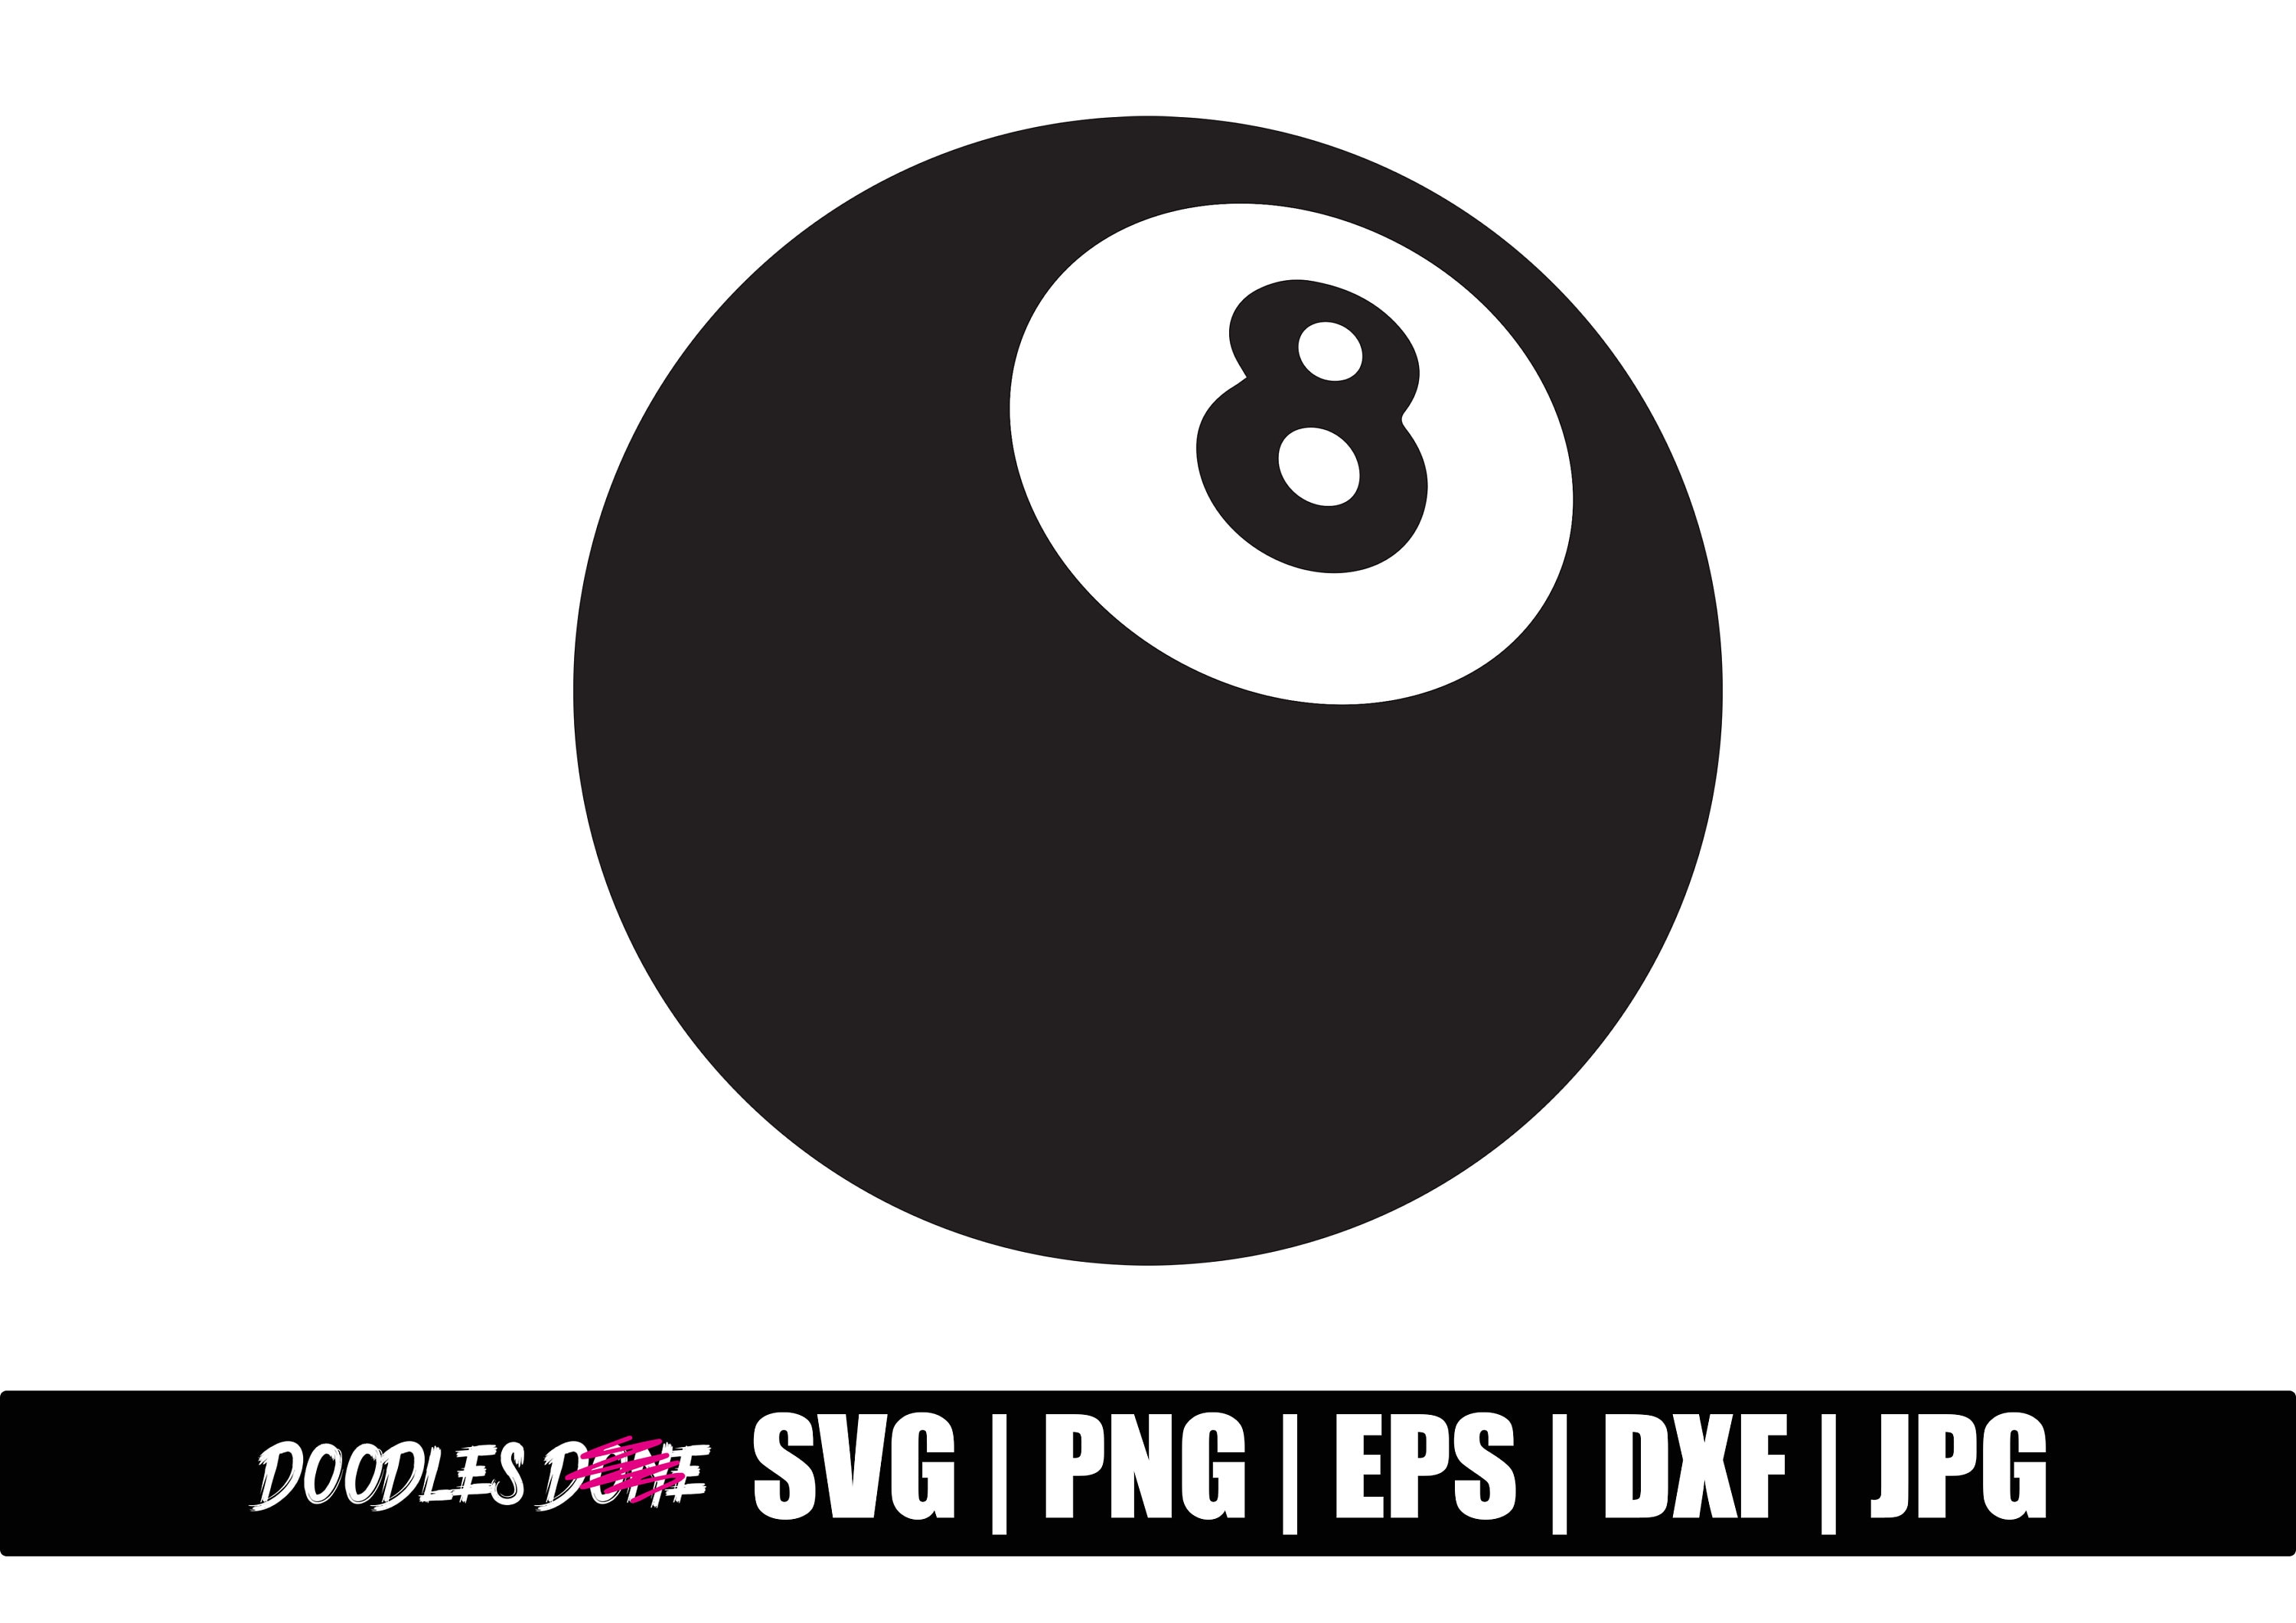 Eight Ball. Set Of Realistic 8 Ball. Isolated On A White Background. Vector  Illustration Billiards. Royalty Free SVG, Cliparts, Vectors, and Stock  Illustration. Image 113692895.